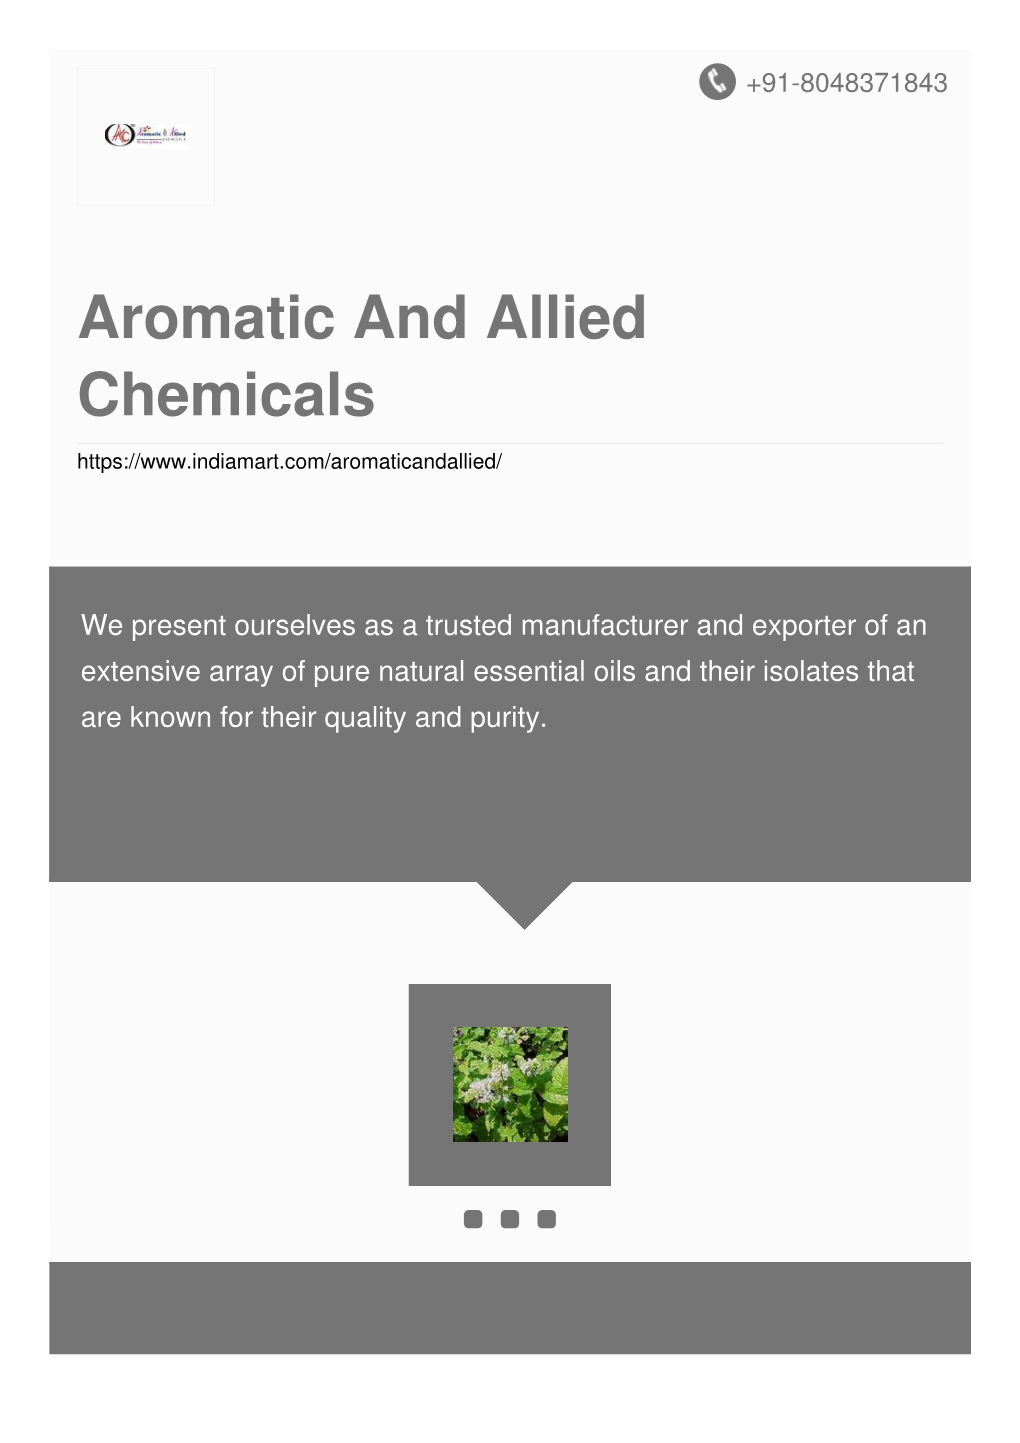 Aromatic and Allied Chemicals